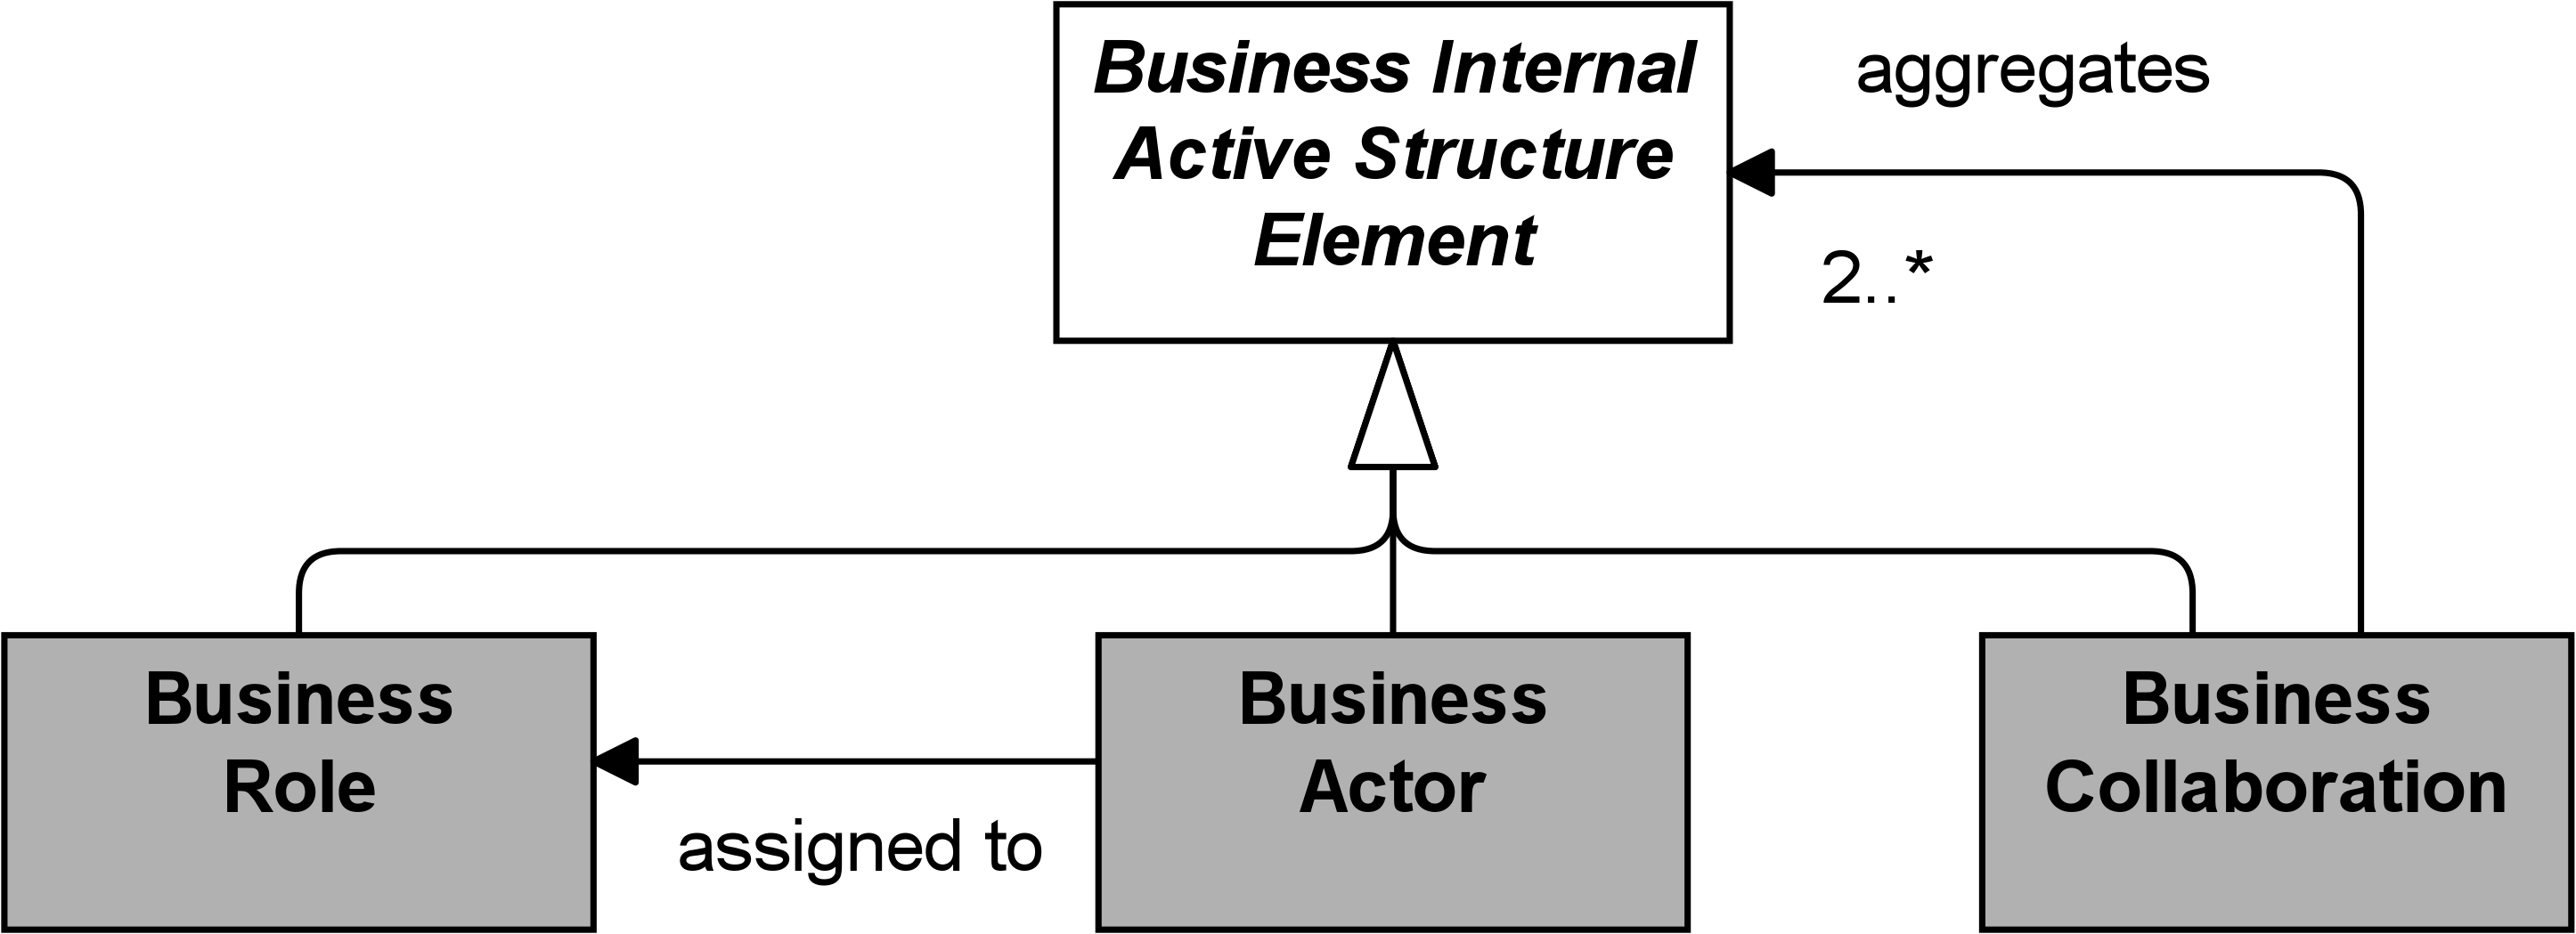 fig Business Internal Active Structure Elements